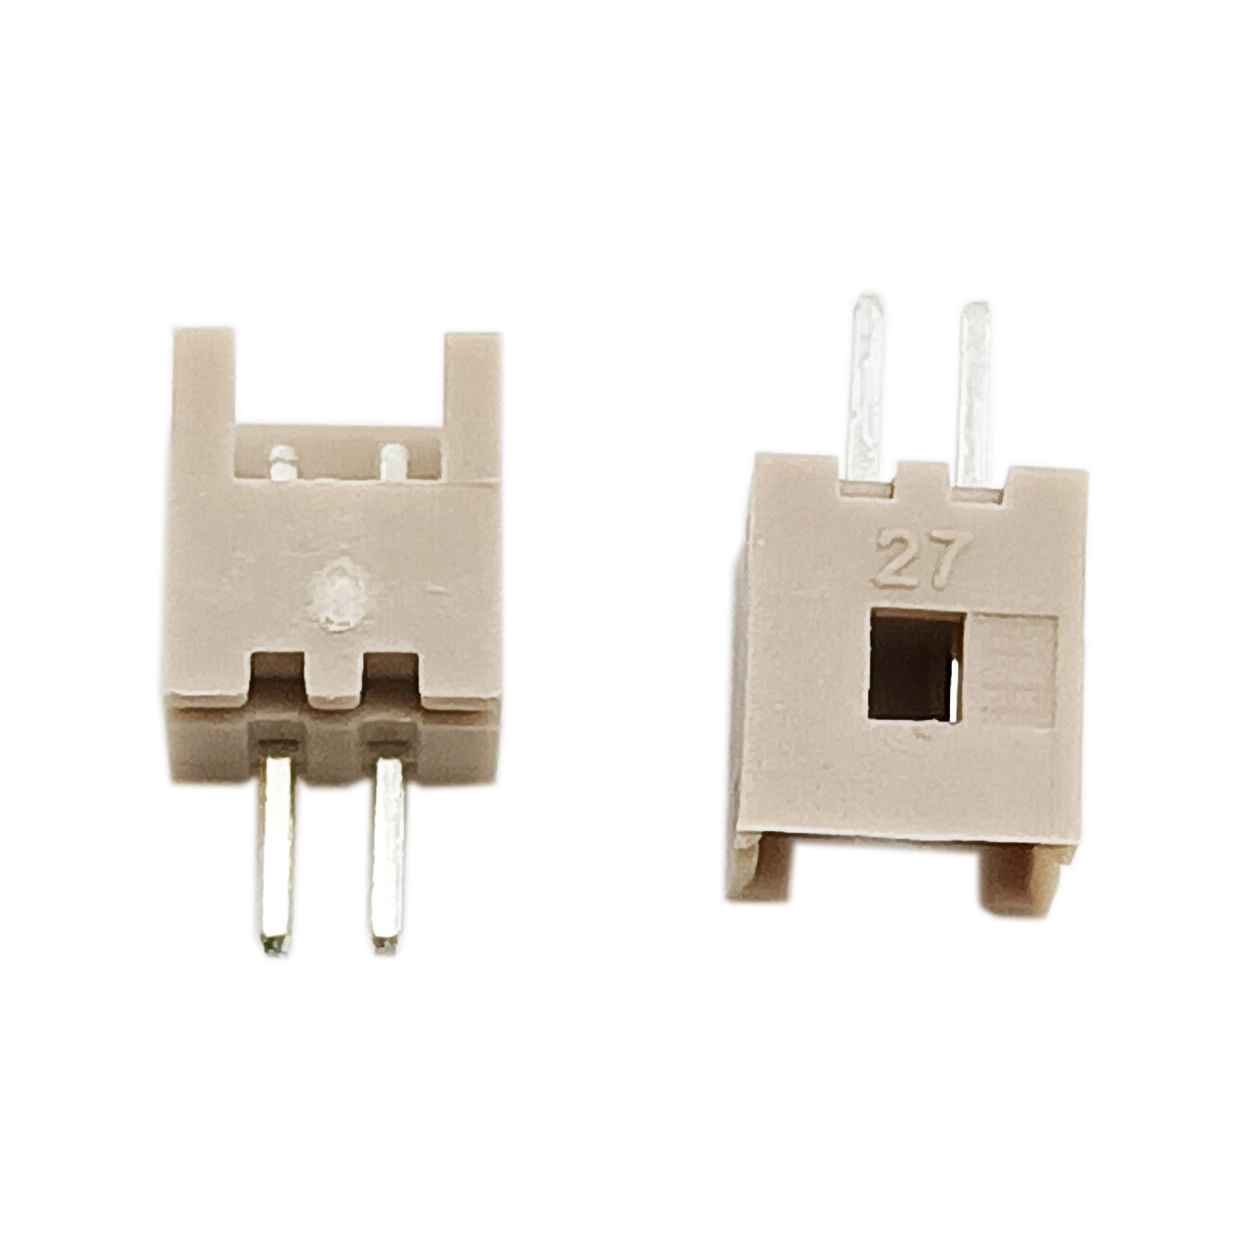 DF13-2P-1.25DSA is a compact 2-pin connector with a 1.25mm pitch, perfect for tight spaces. It's commonly used in electronics for secure, reliable connections in various applications. 